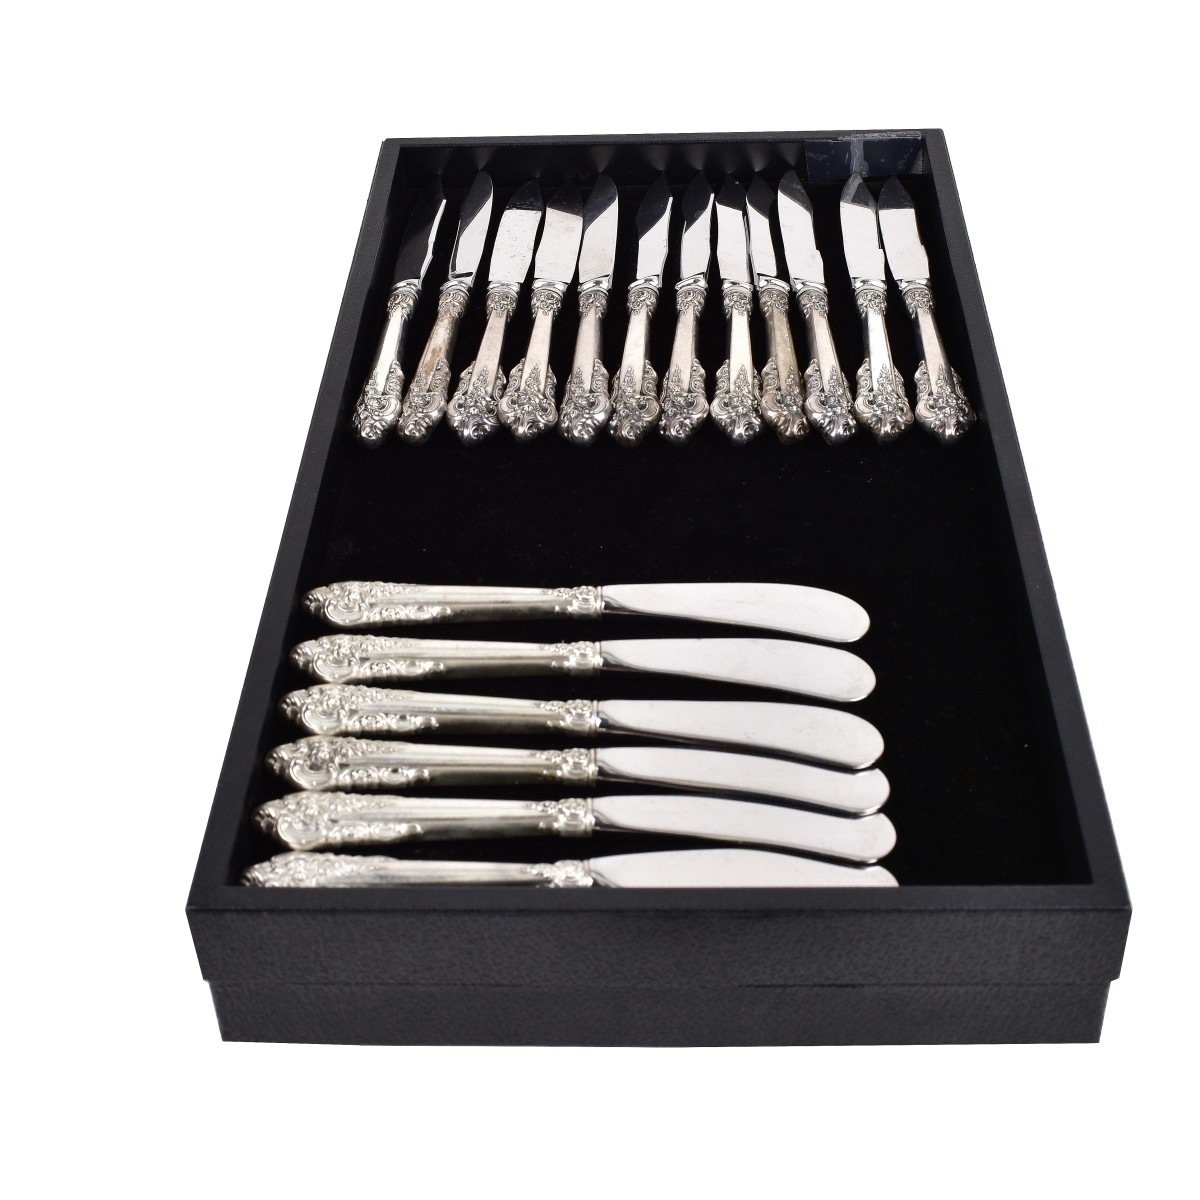 18 Wallace Grande Baroque Fruit and Butter Knives